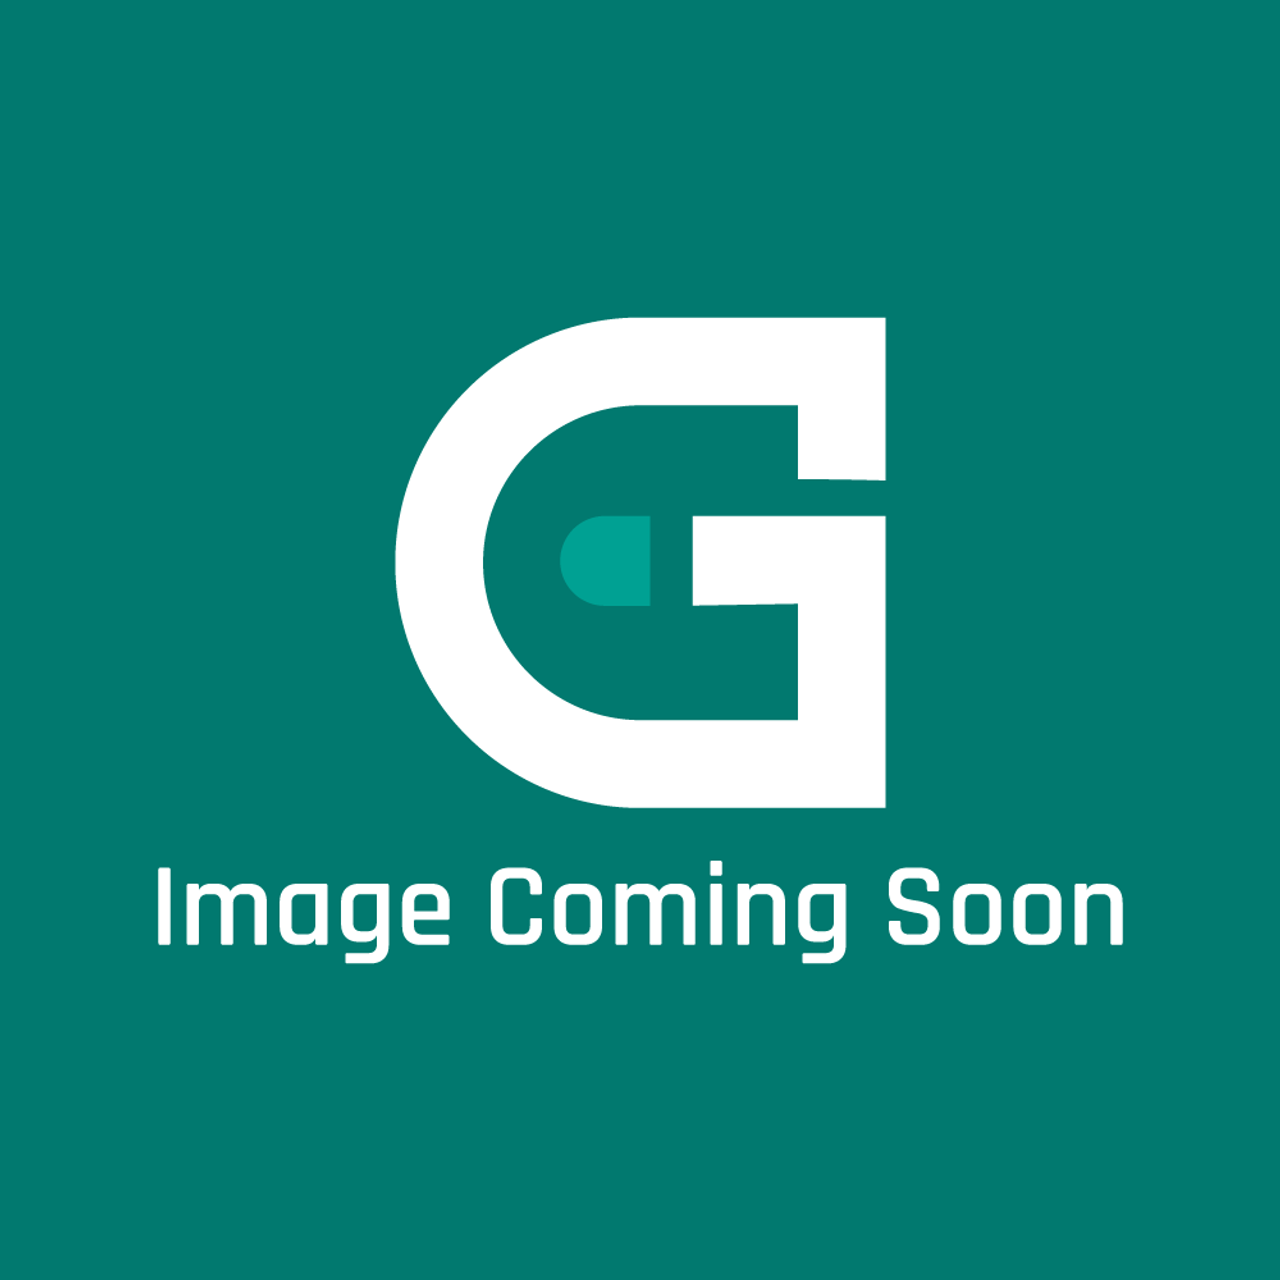 GE Appliances WD30X10027 - Upper Front Brace Wh - Image Coming Soon!